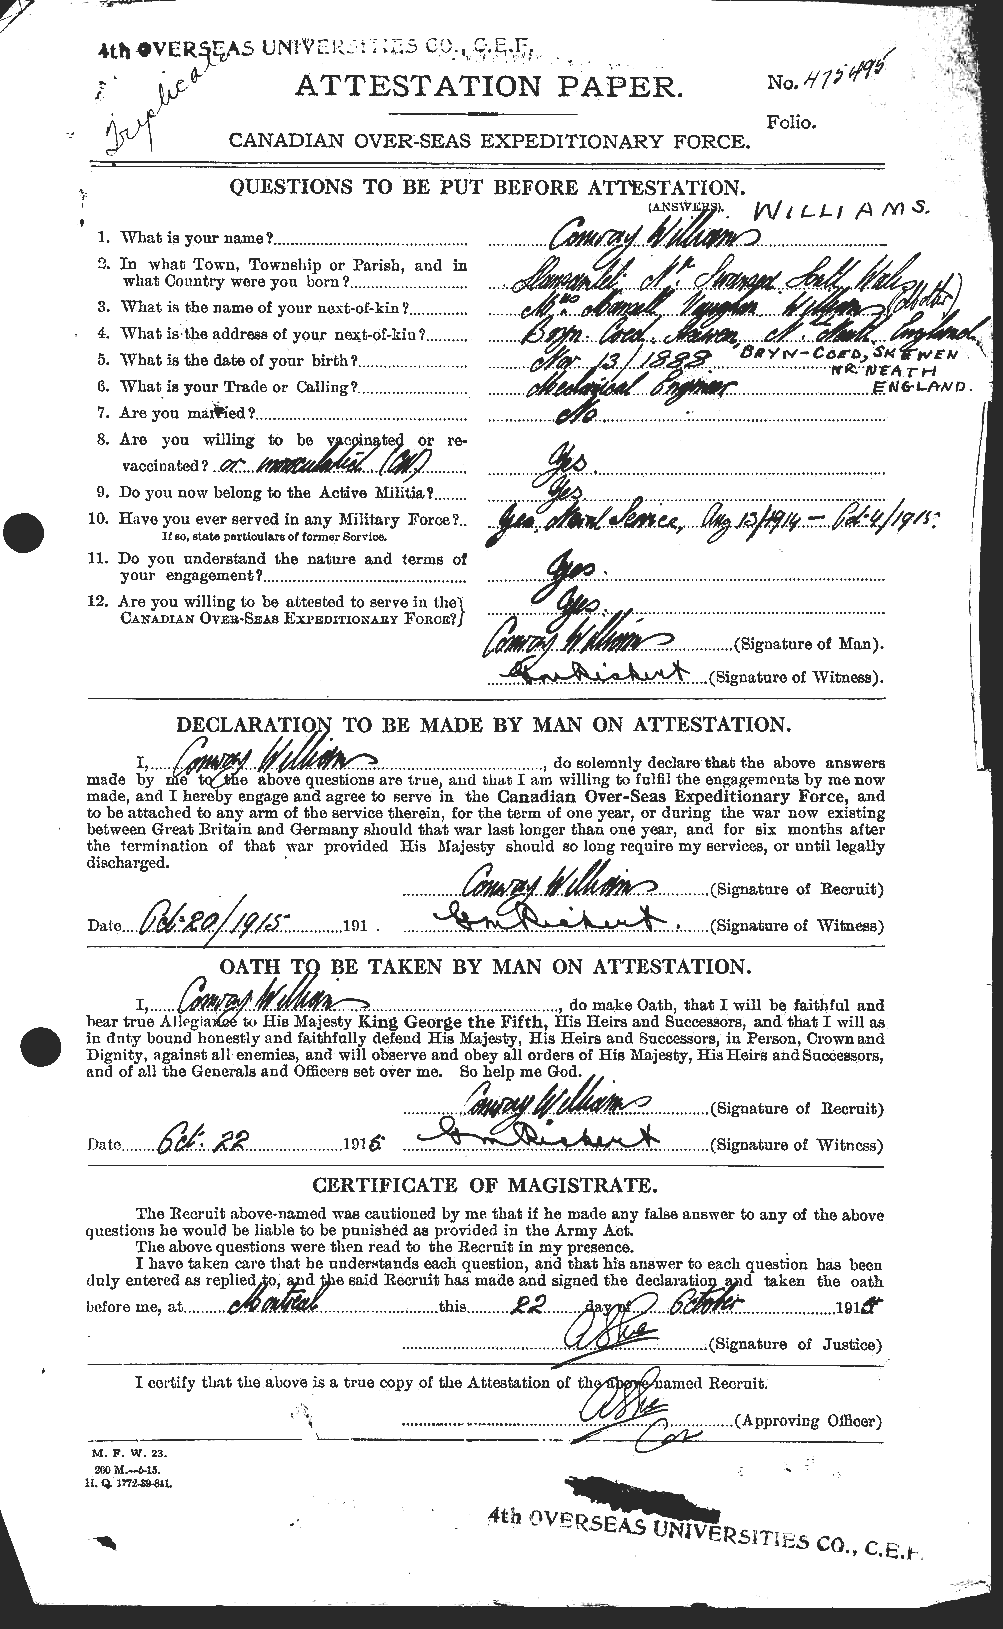 Personnel Records of the First World War - CEF 674449a